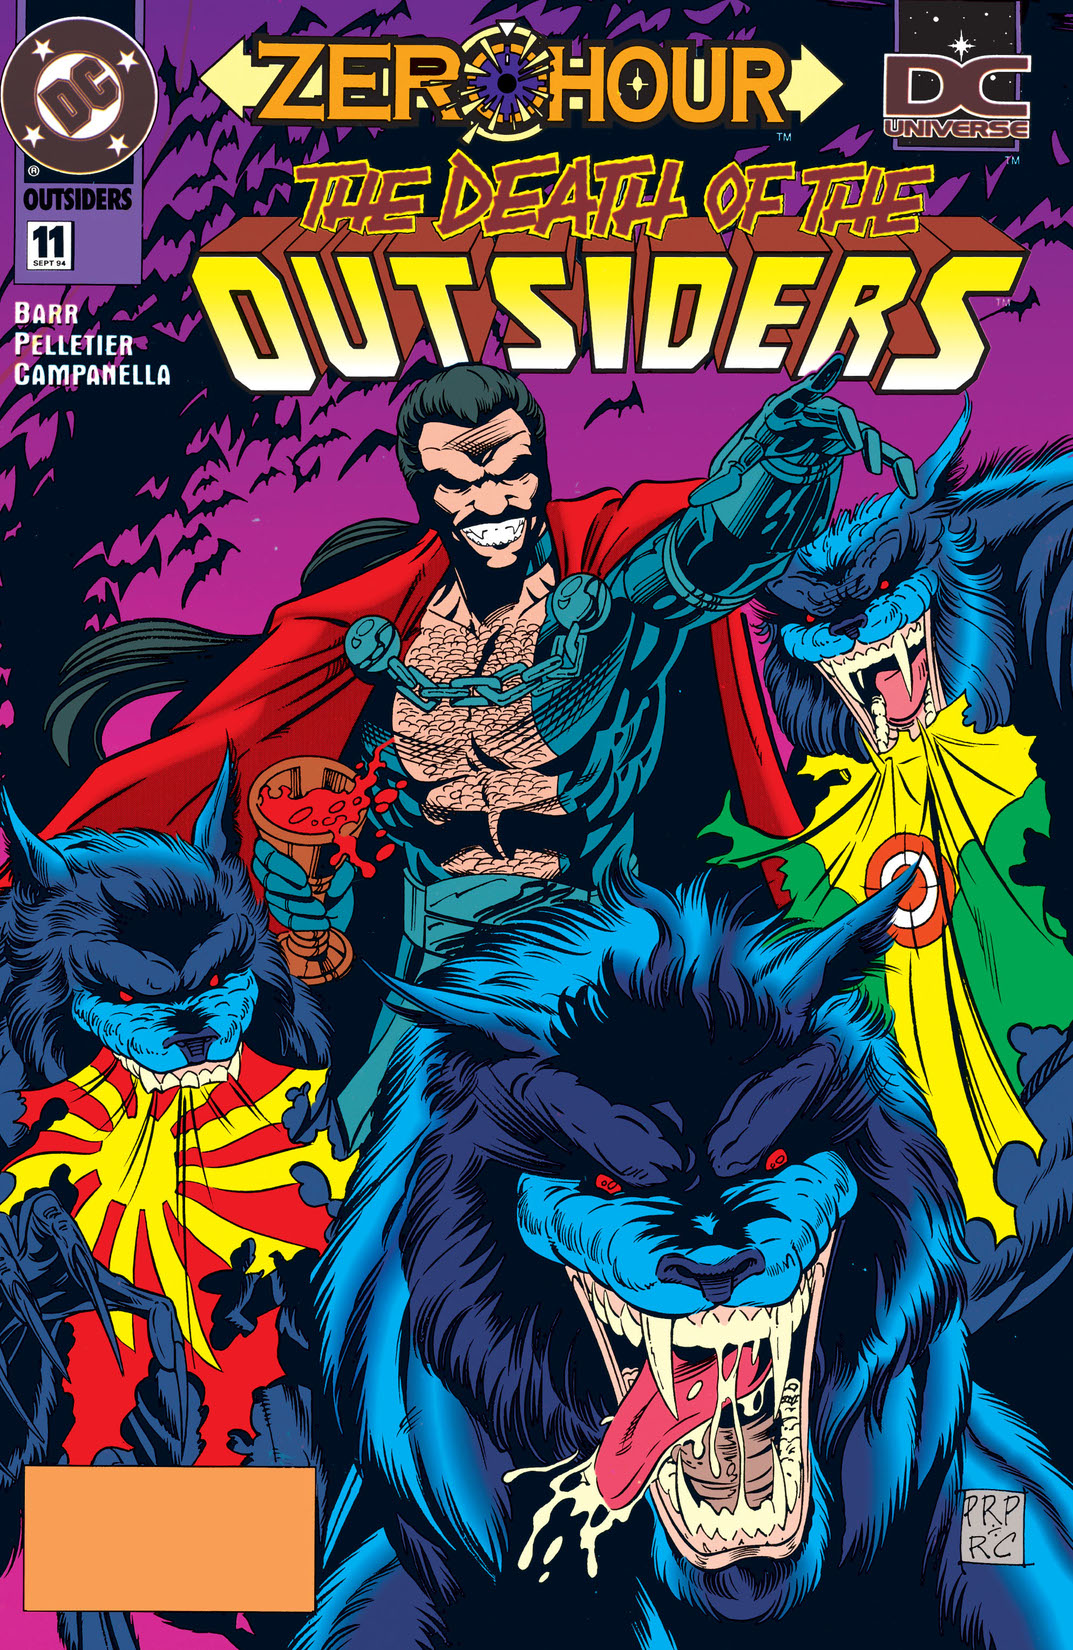 Outsiders (1993-1995) #11 preview images